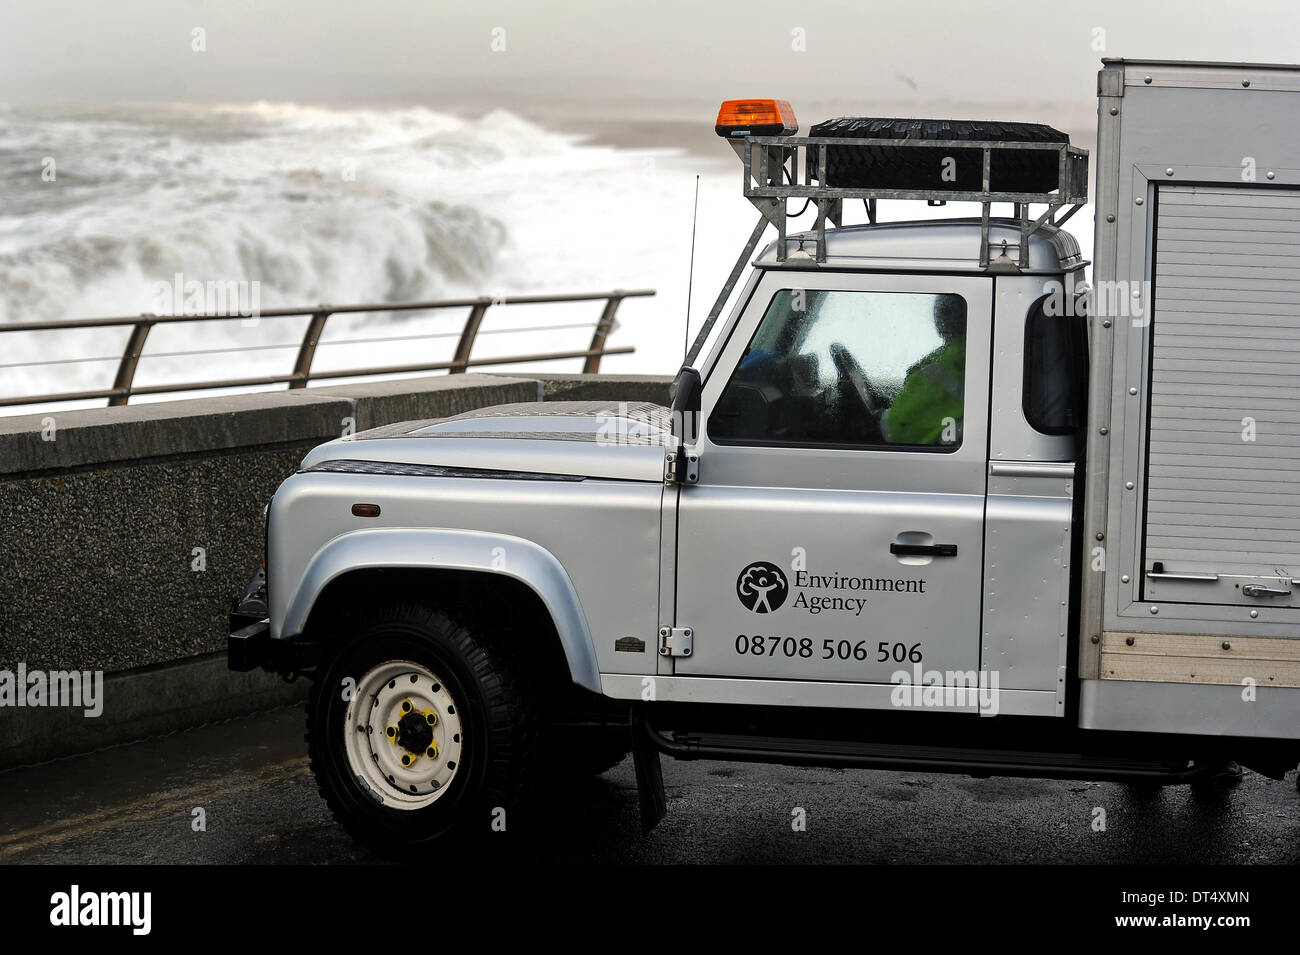 Environment Agency, UK, staff from the Environment Agency in their vehicle. Stock Photo